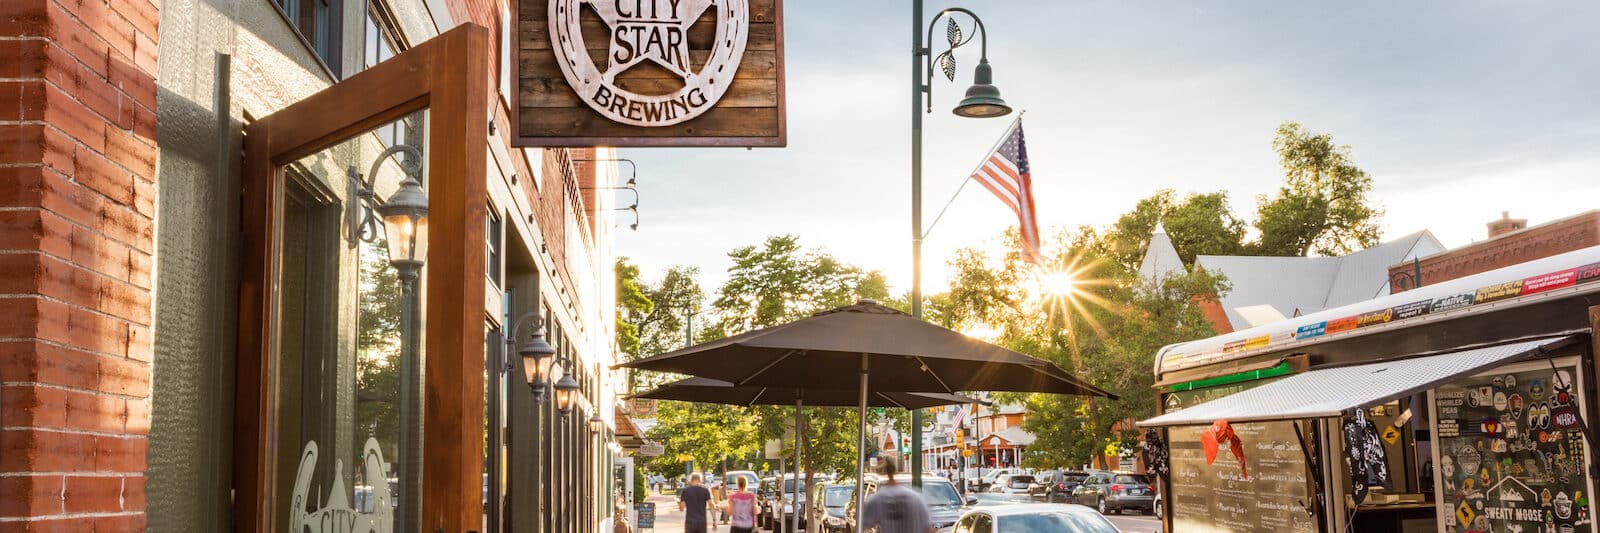 City Star Brewing entrance sign